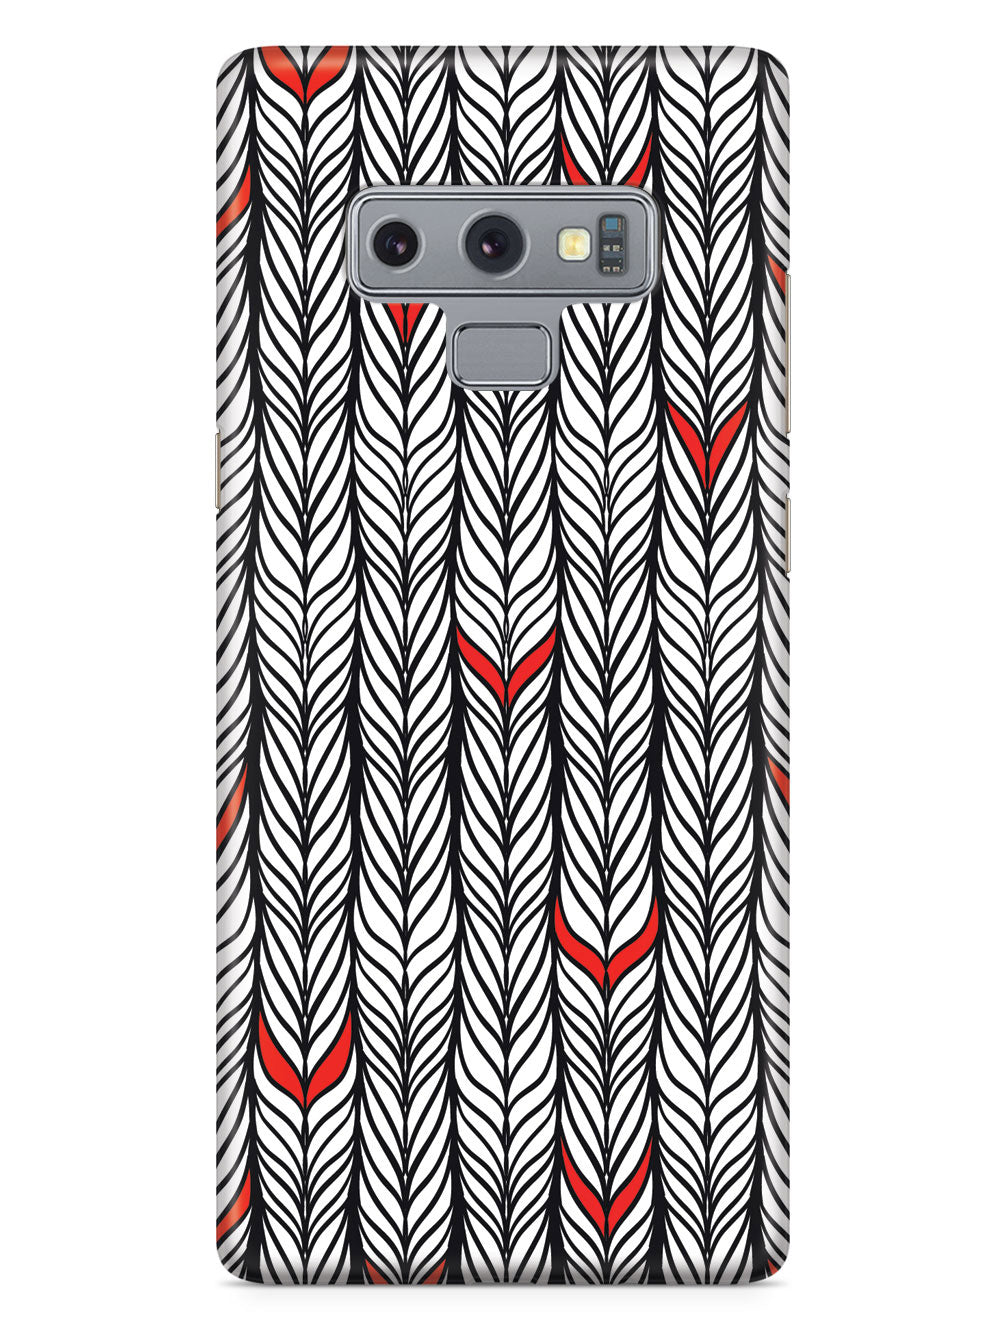 Braids Texture with Red Accents Case